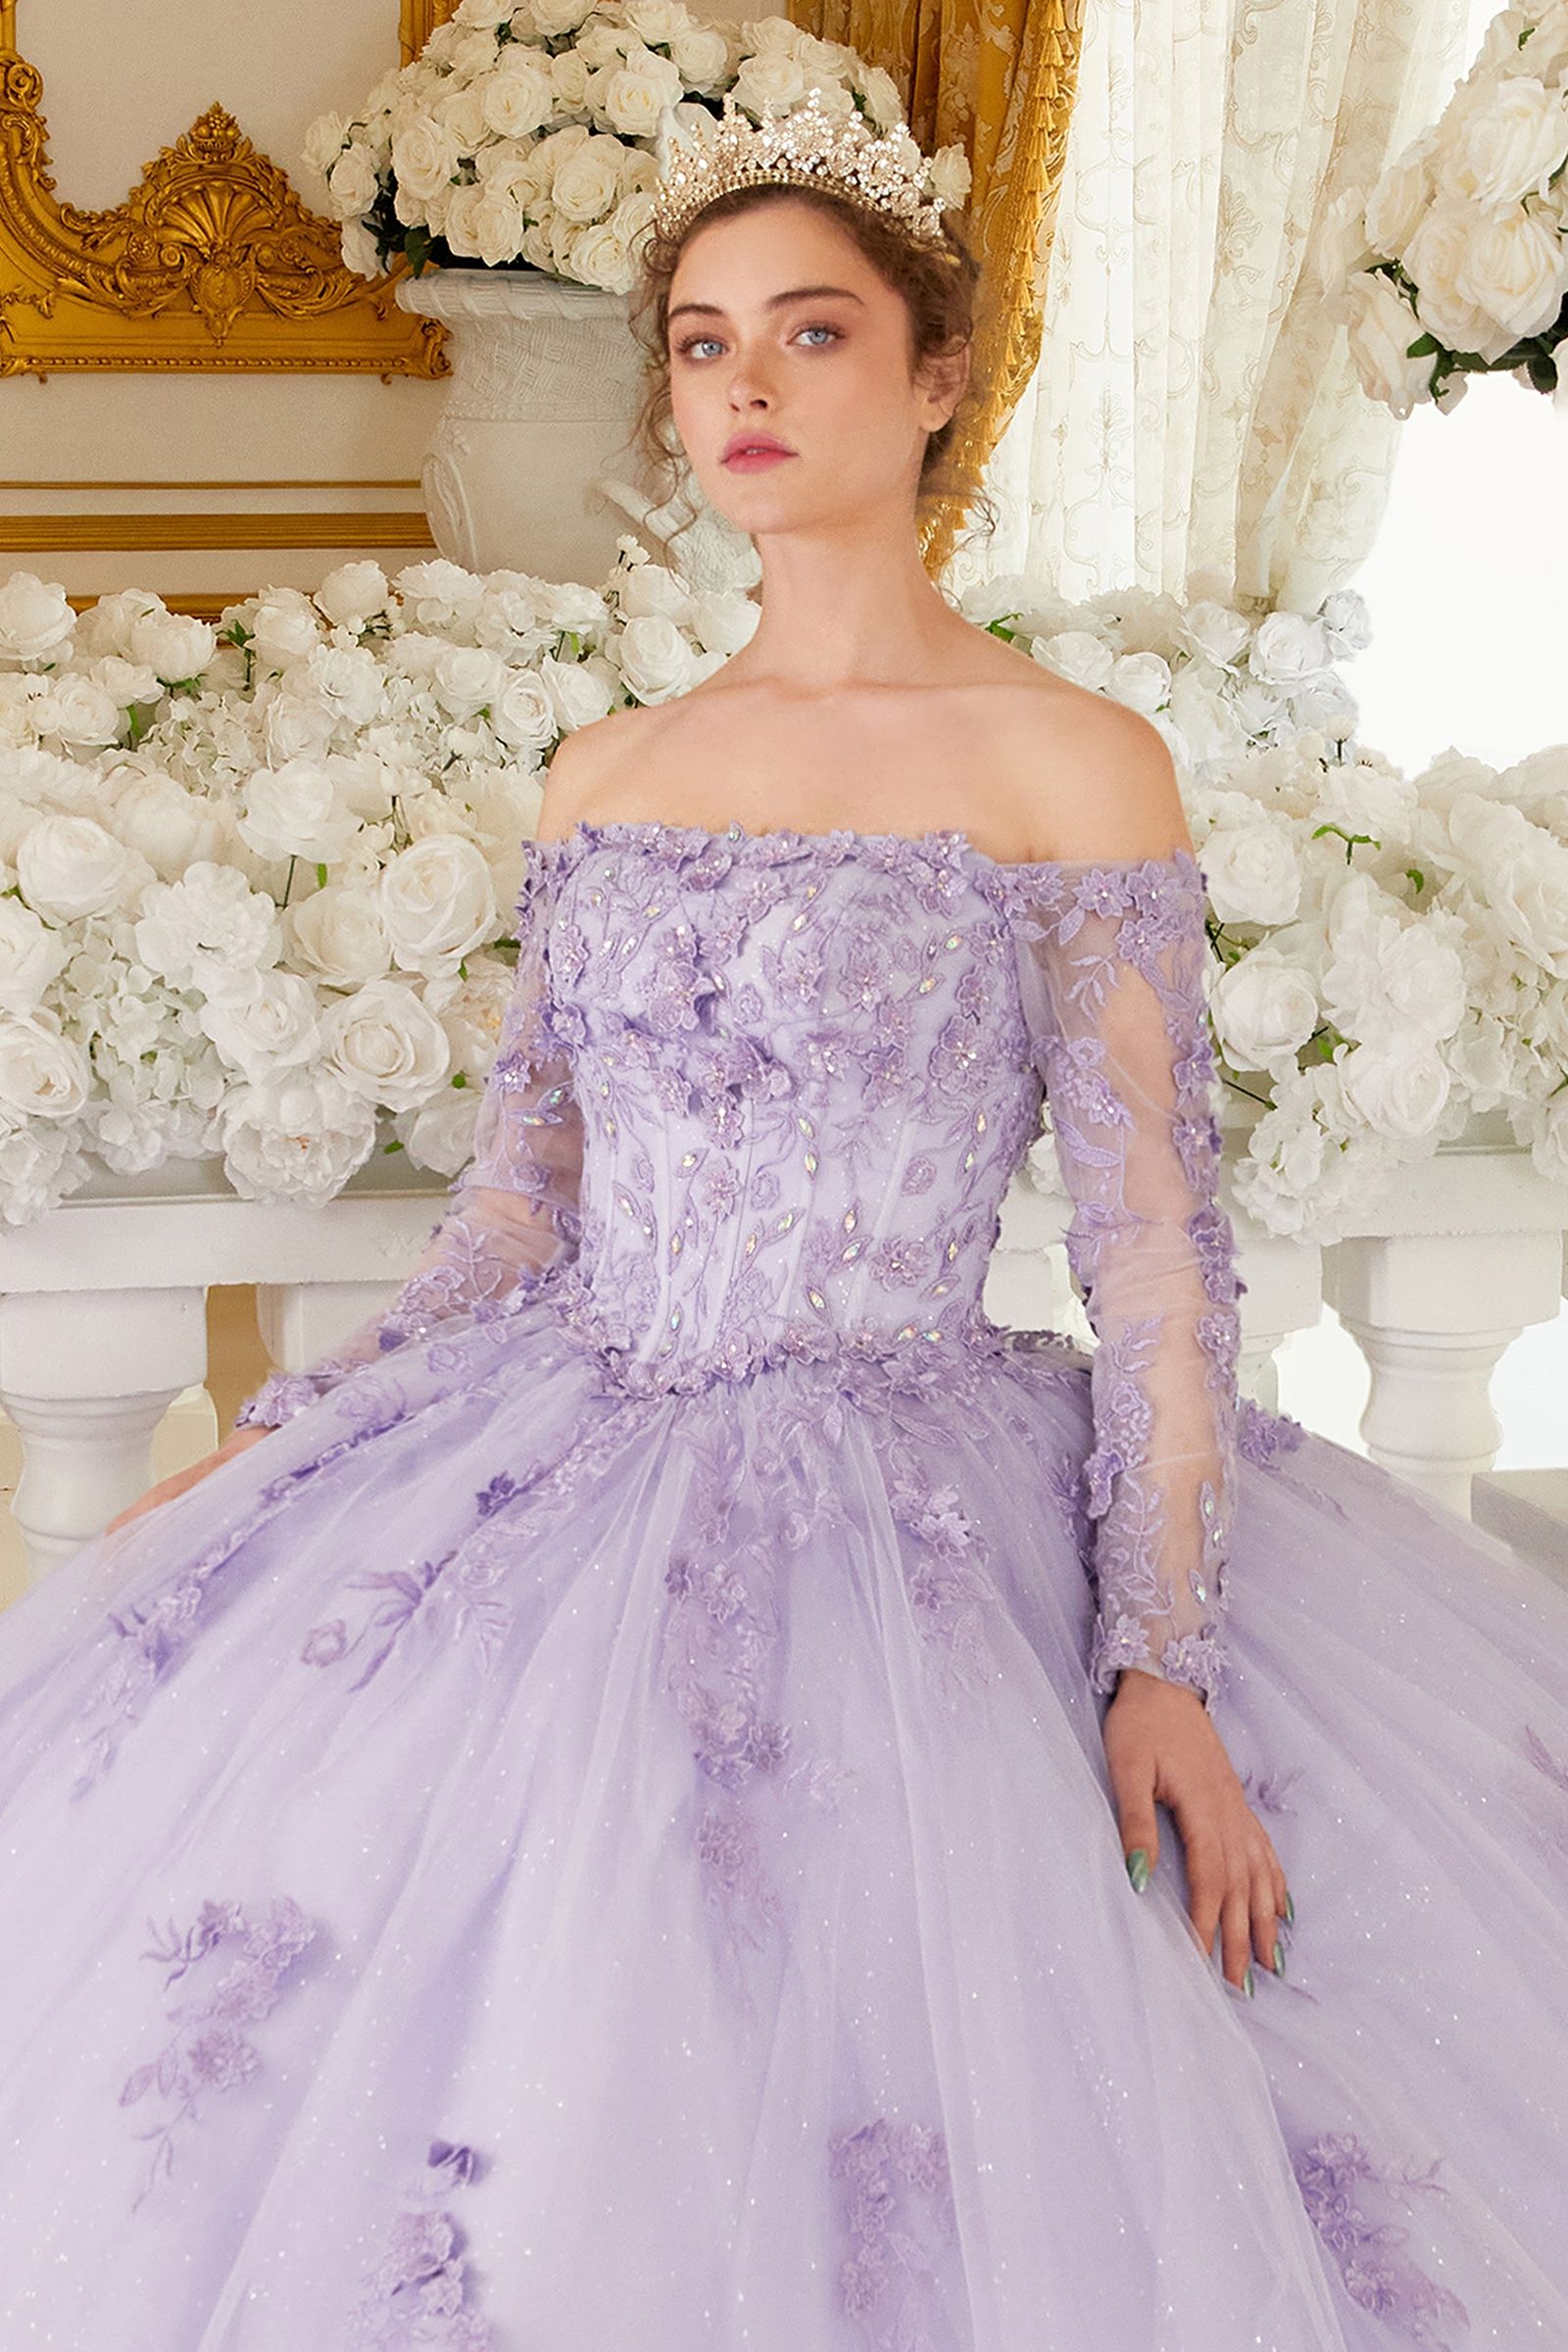 This gorgeous lilac off-the-shoulder, long-sleeved ball gown is an enchanting piece of work that will make you look like a quinceanera princess! The crafted lace and beaded applique add the perfect amount of shine to the bodice. Adding to the charm of this dress are the dimensional floral appliques giving it a unique and creative flair